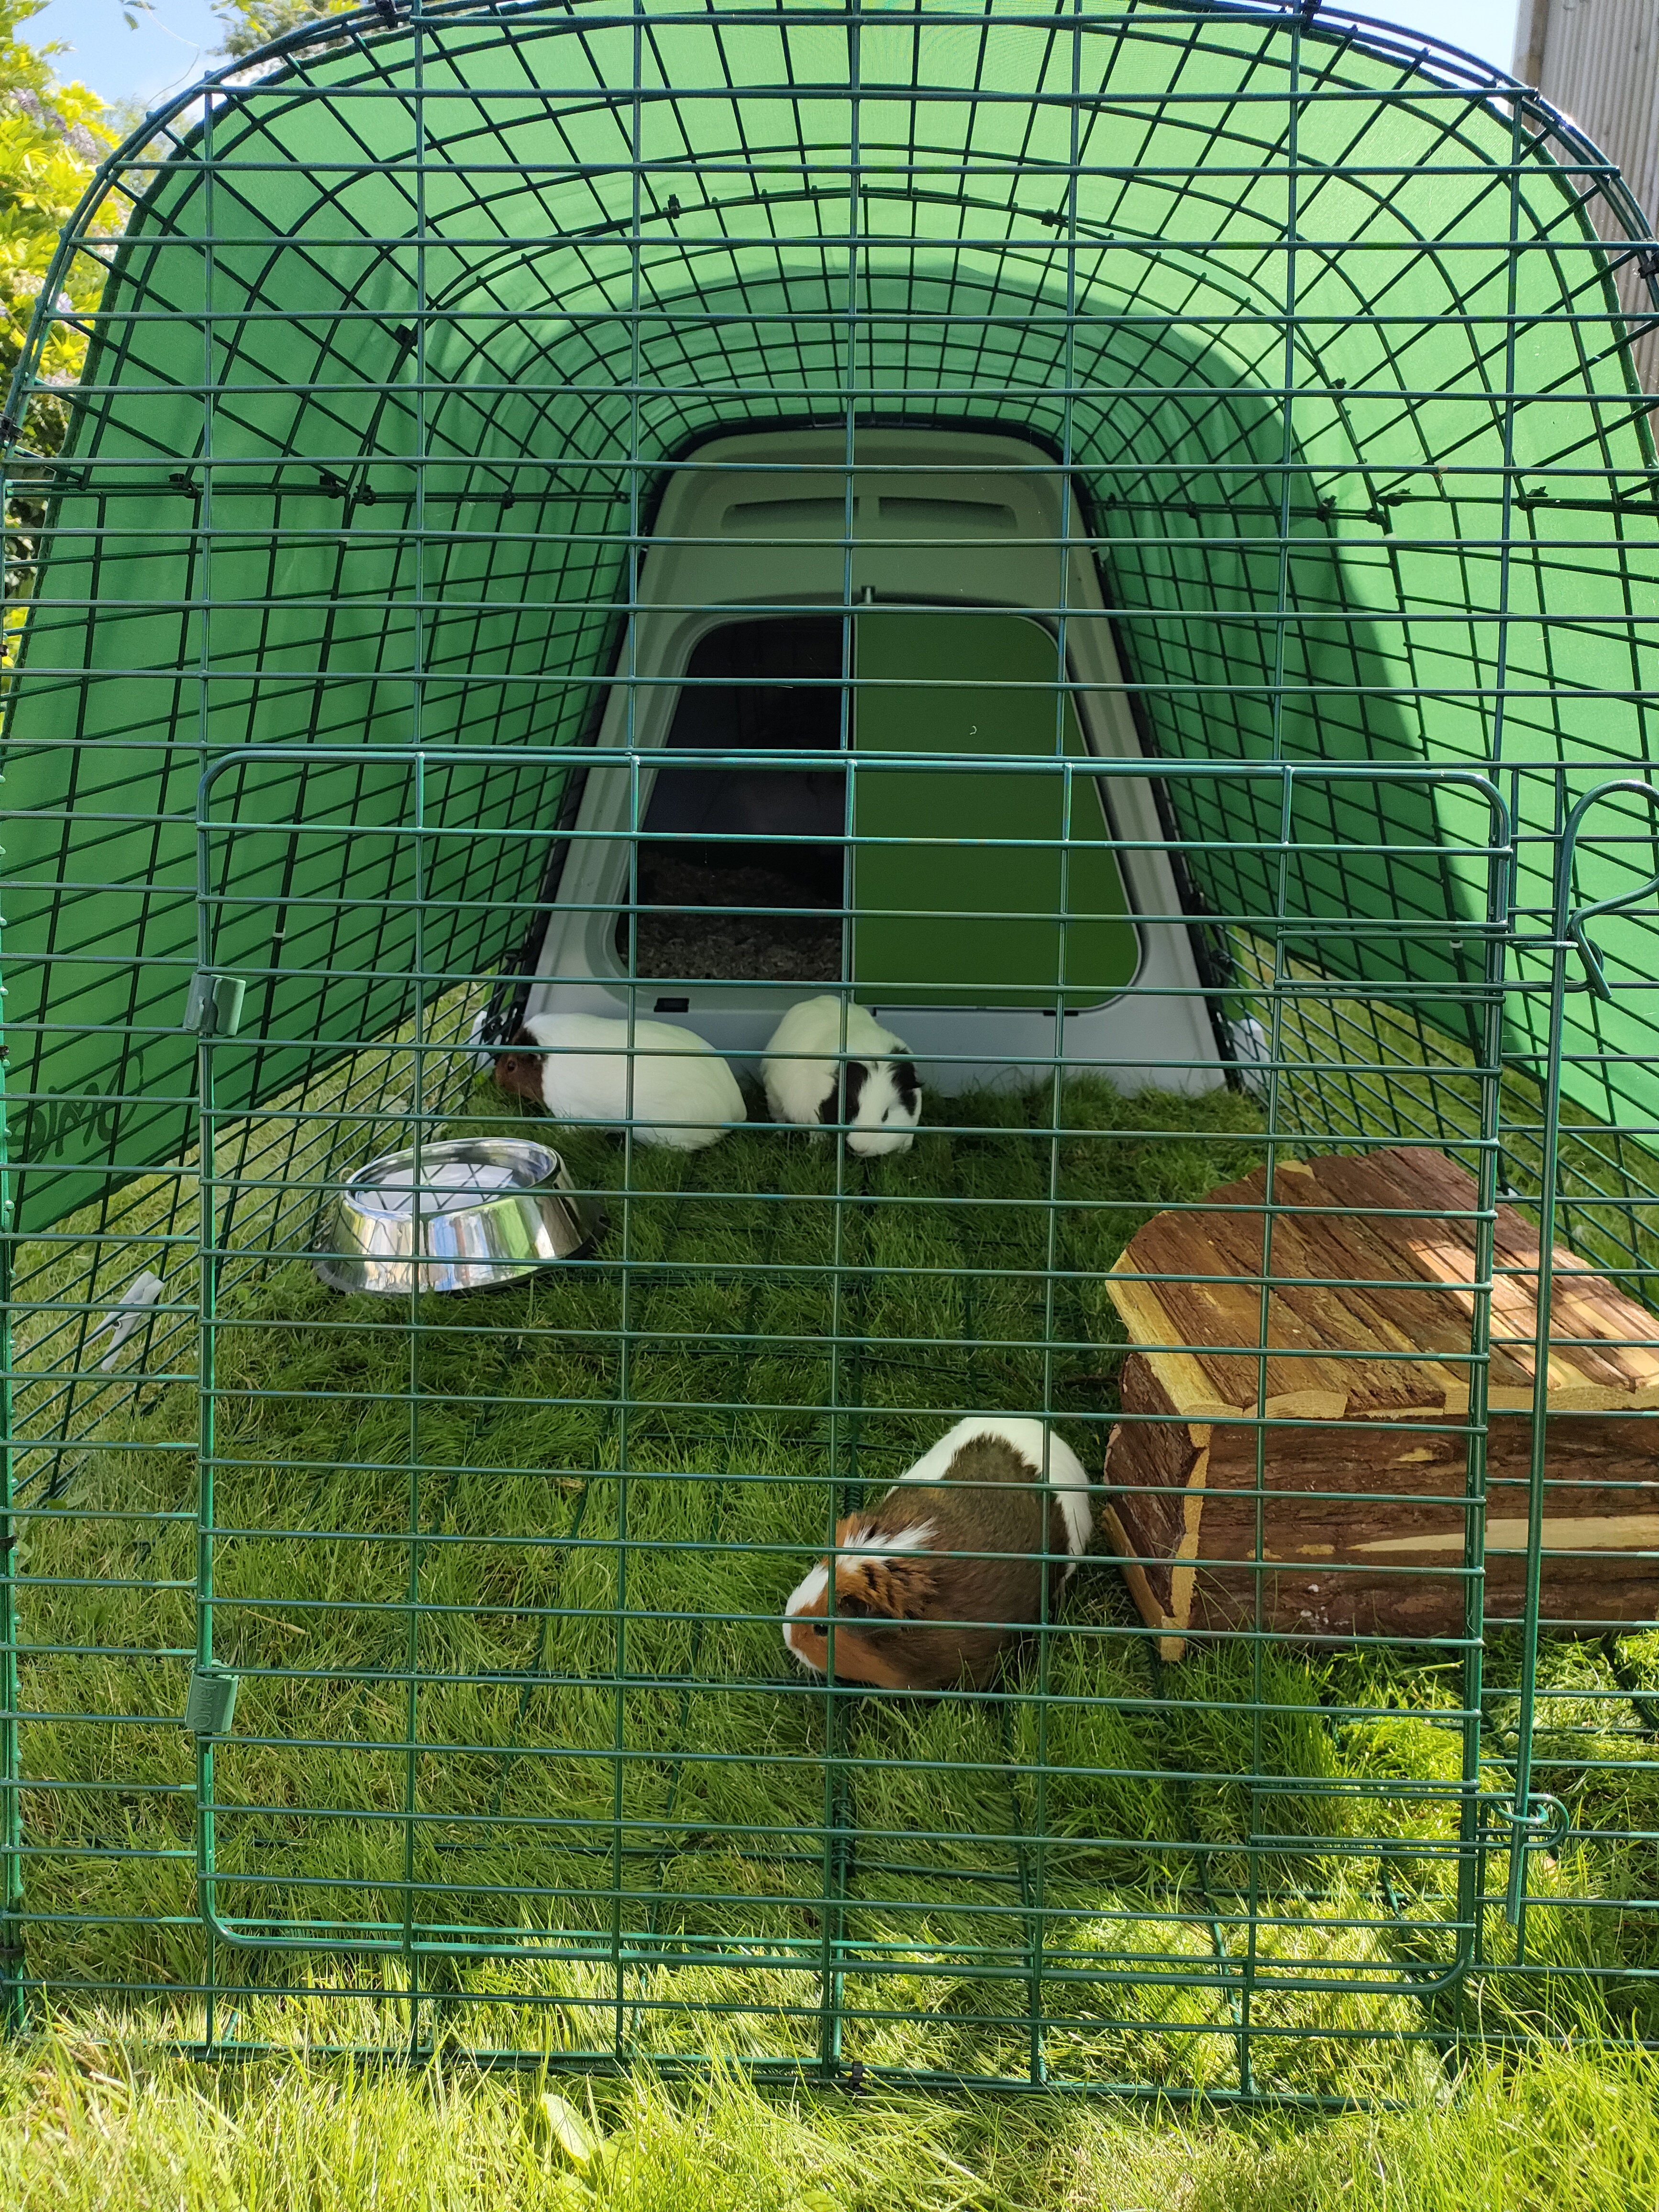 Three guinea pigs in the enclosure of their green hutch